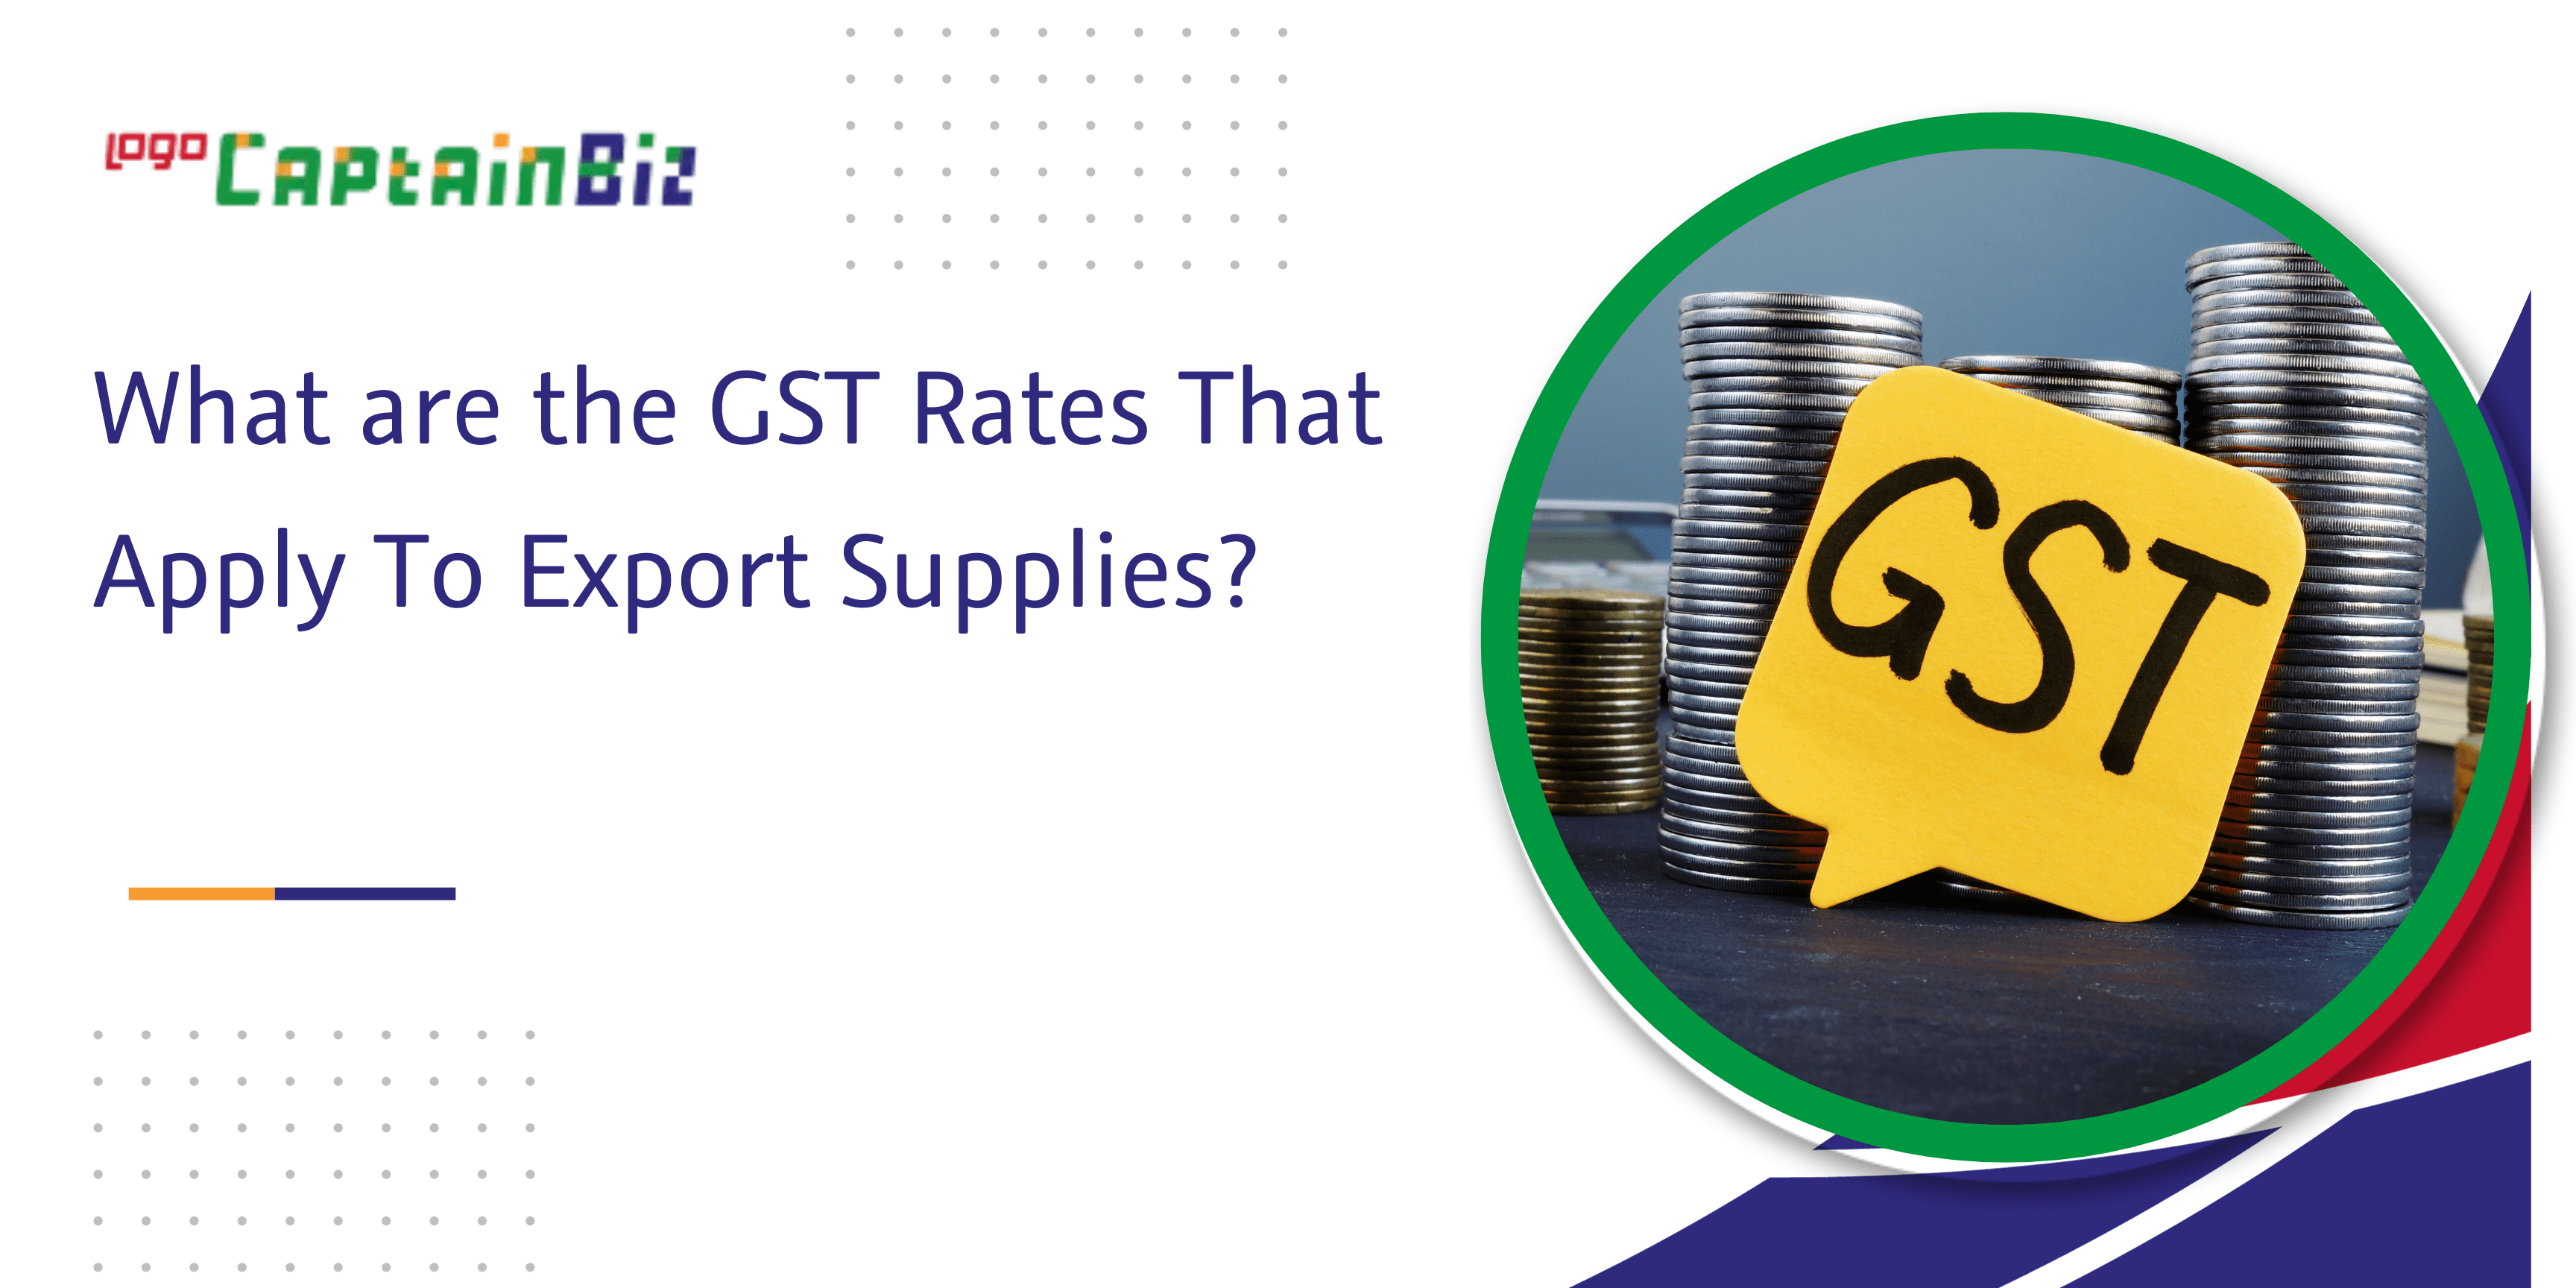 CaptainBiz: What are the GST Rates that apply to export supplies?